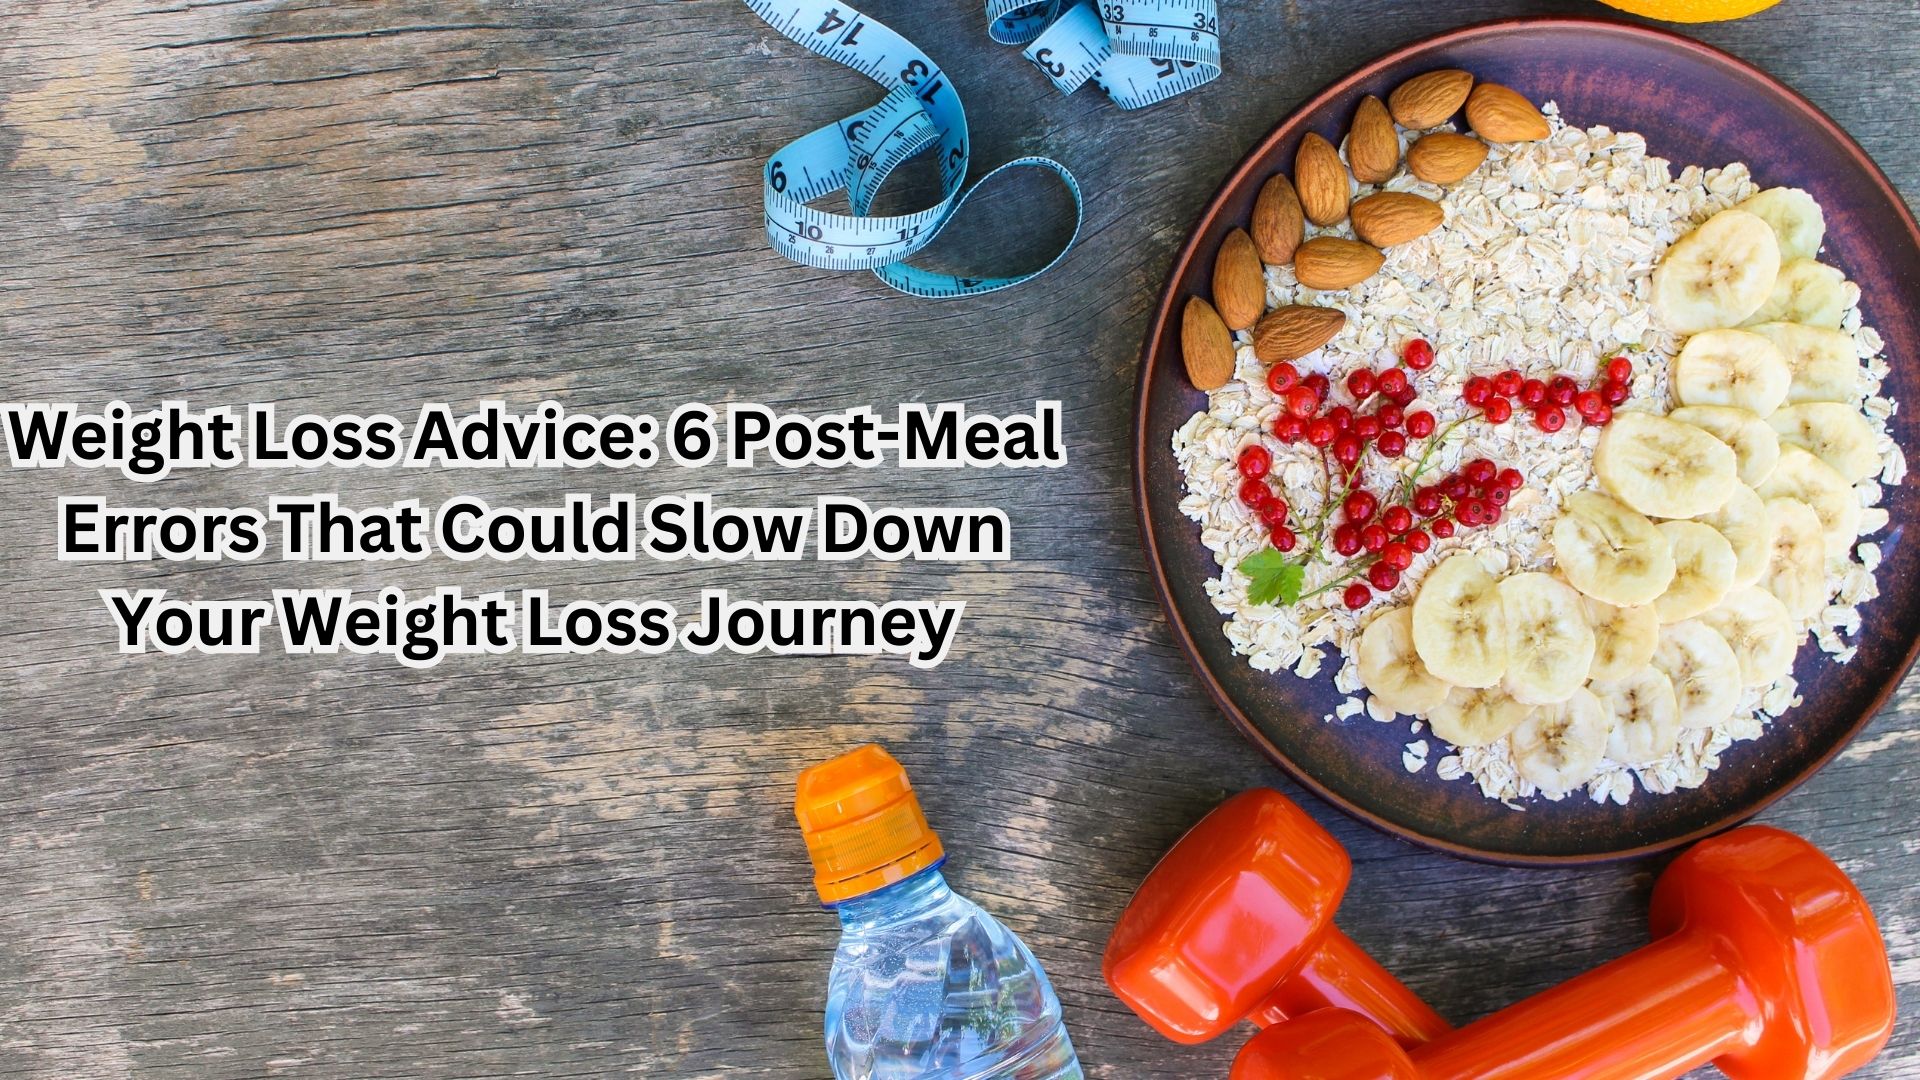 Weight Loss Advice: 6 Post-Meal Errors That Could Slow Down Your Weight Loss Journey